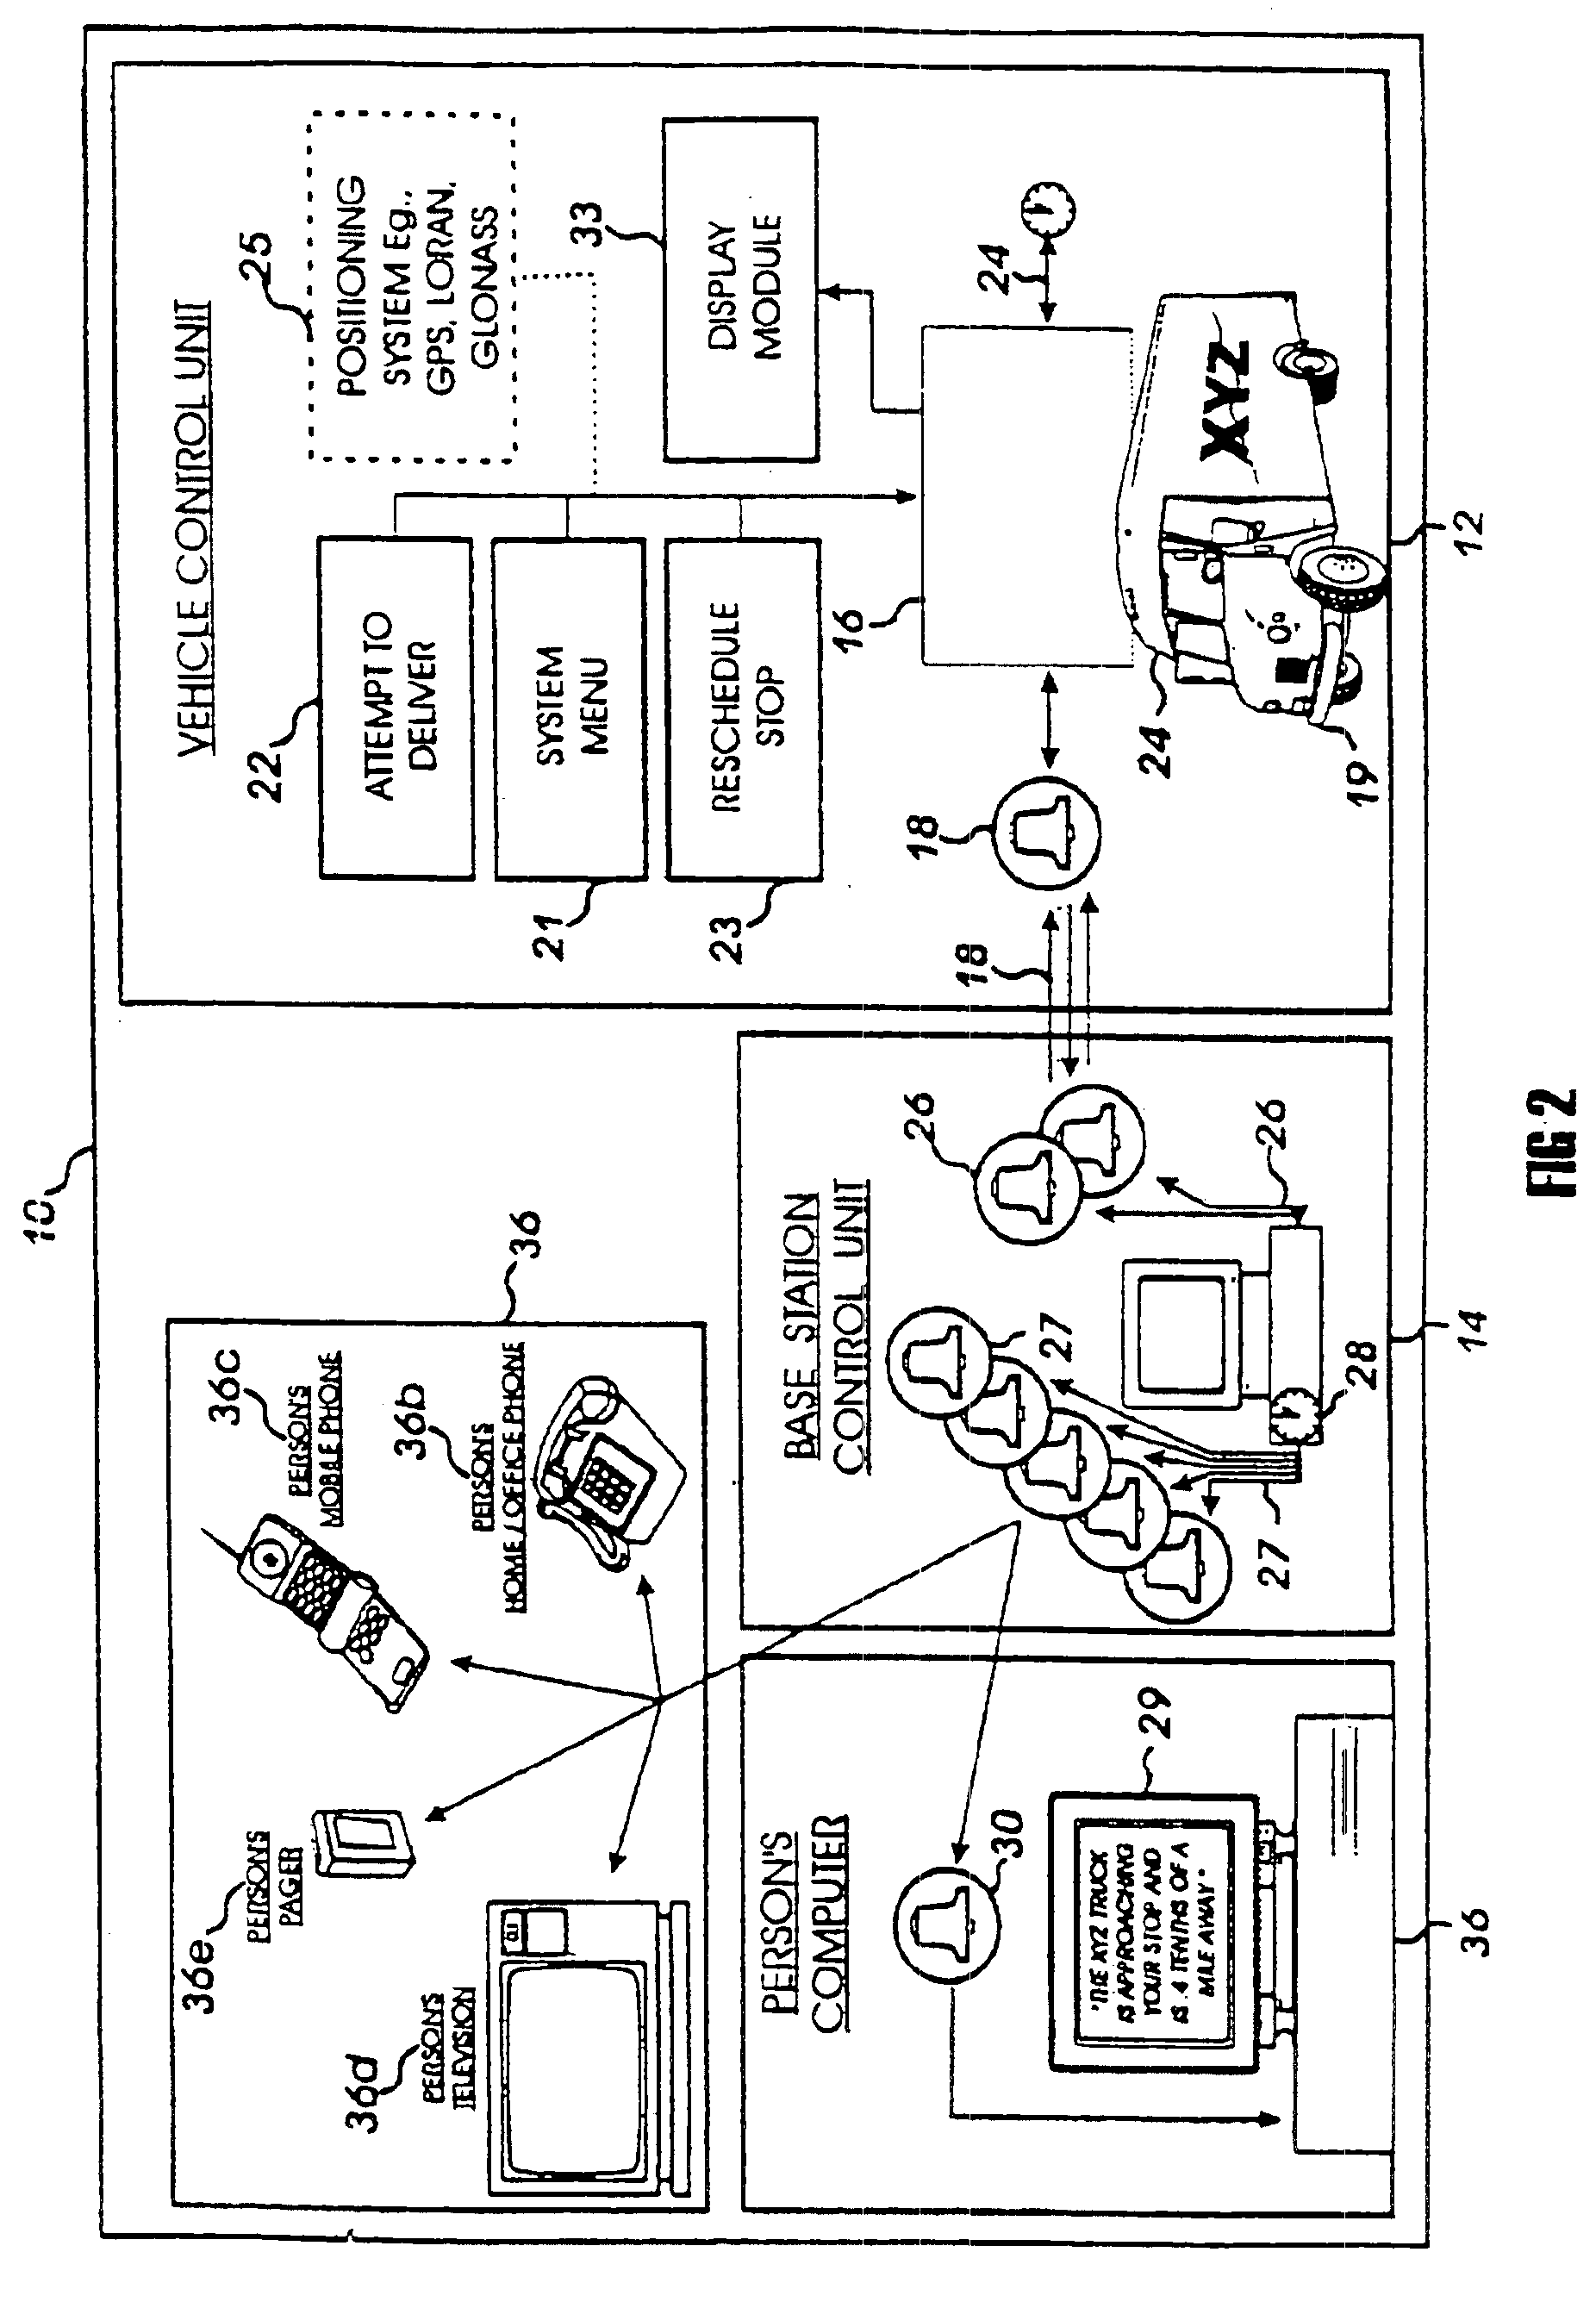 Notification systems and methods with notifications based upon prior package delivery